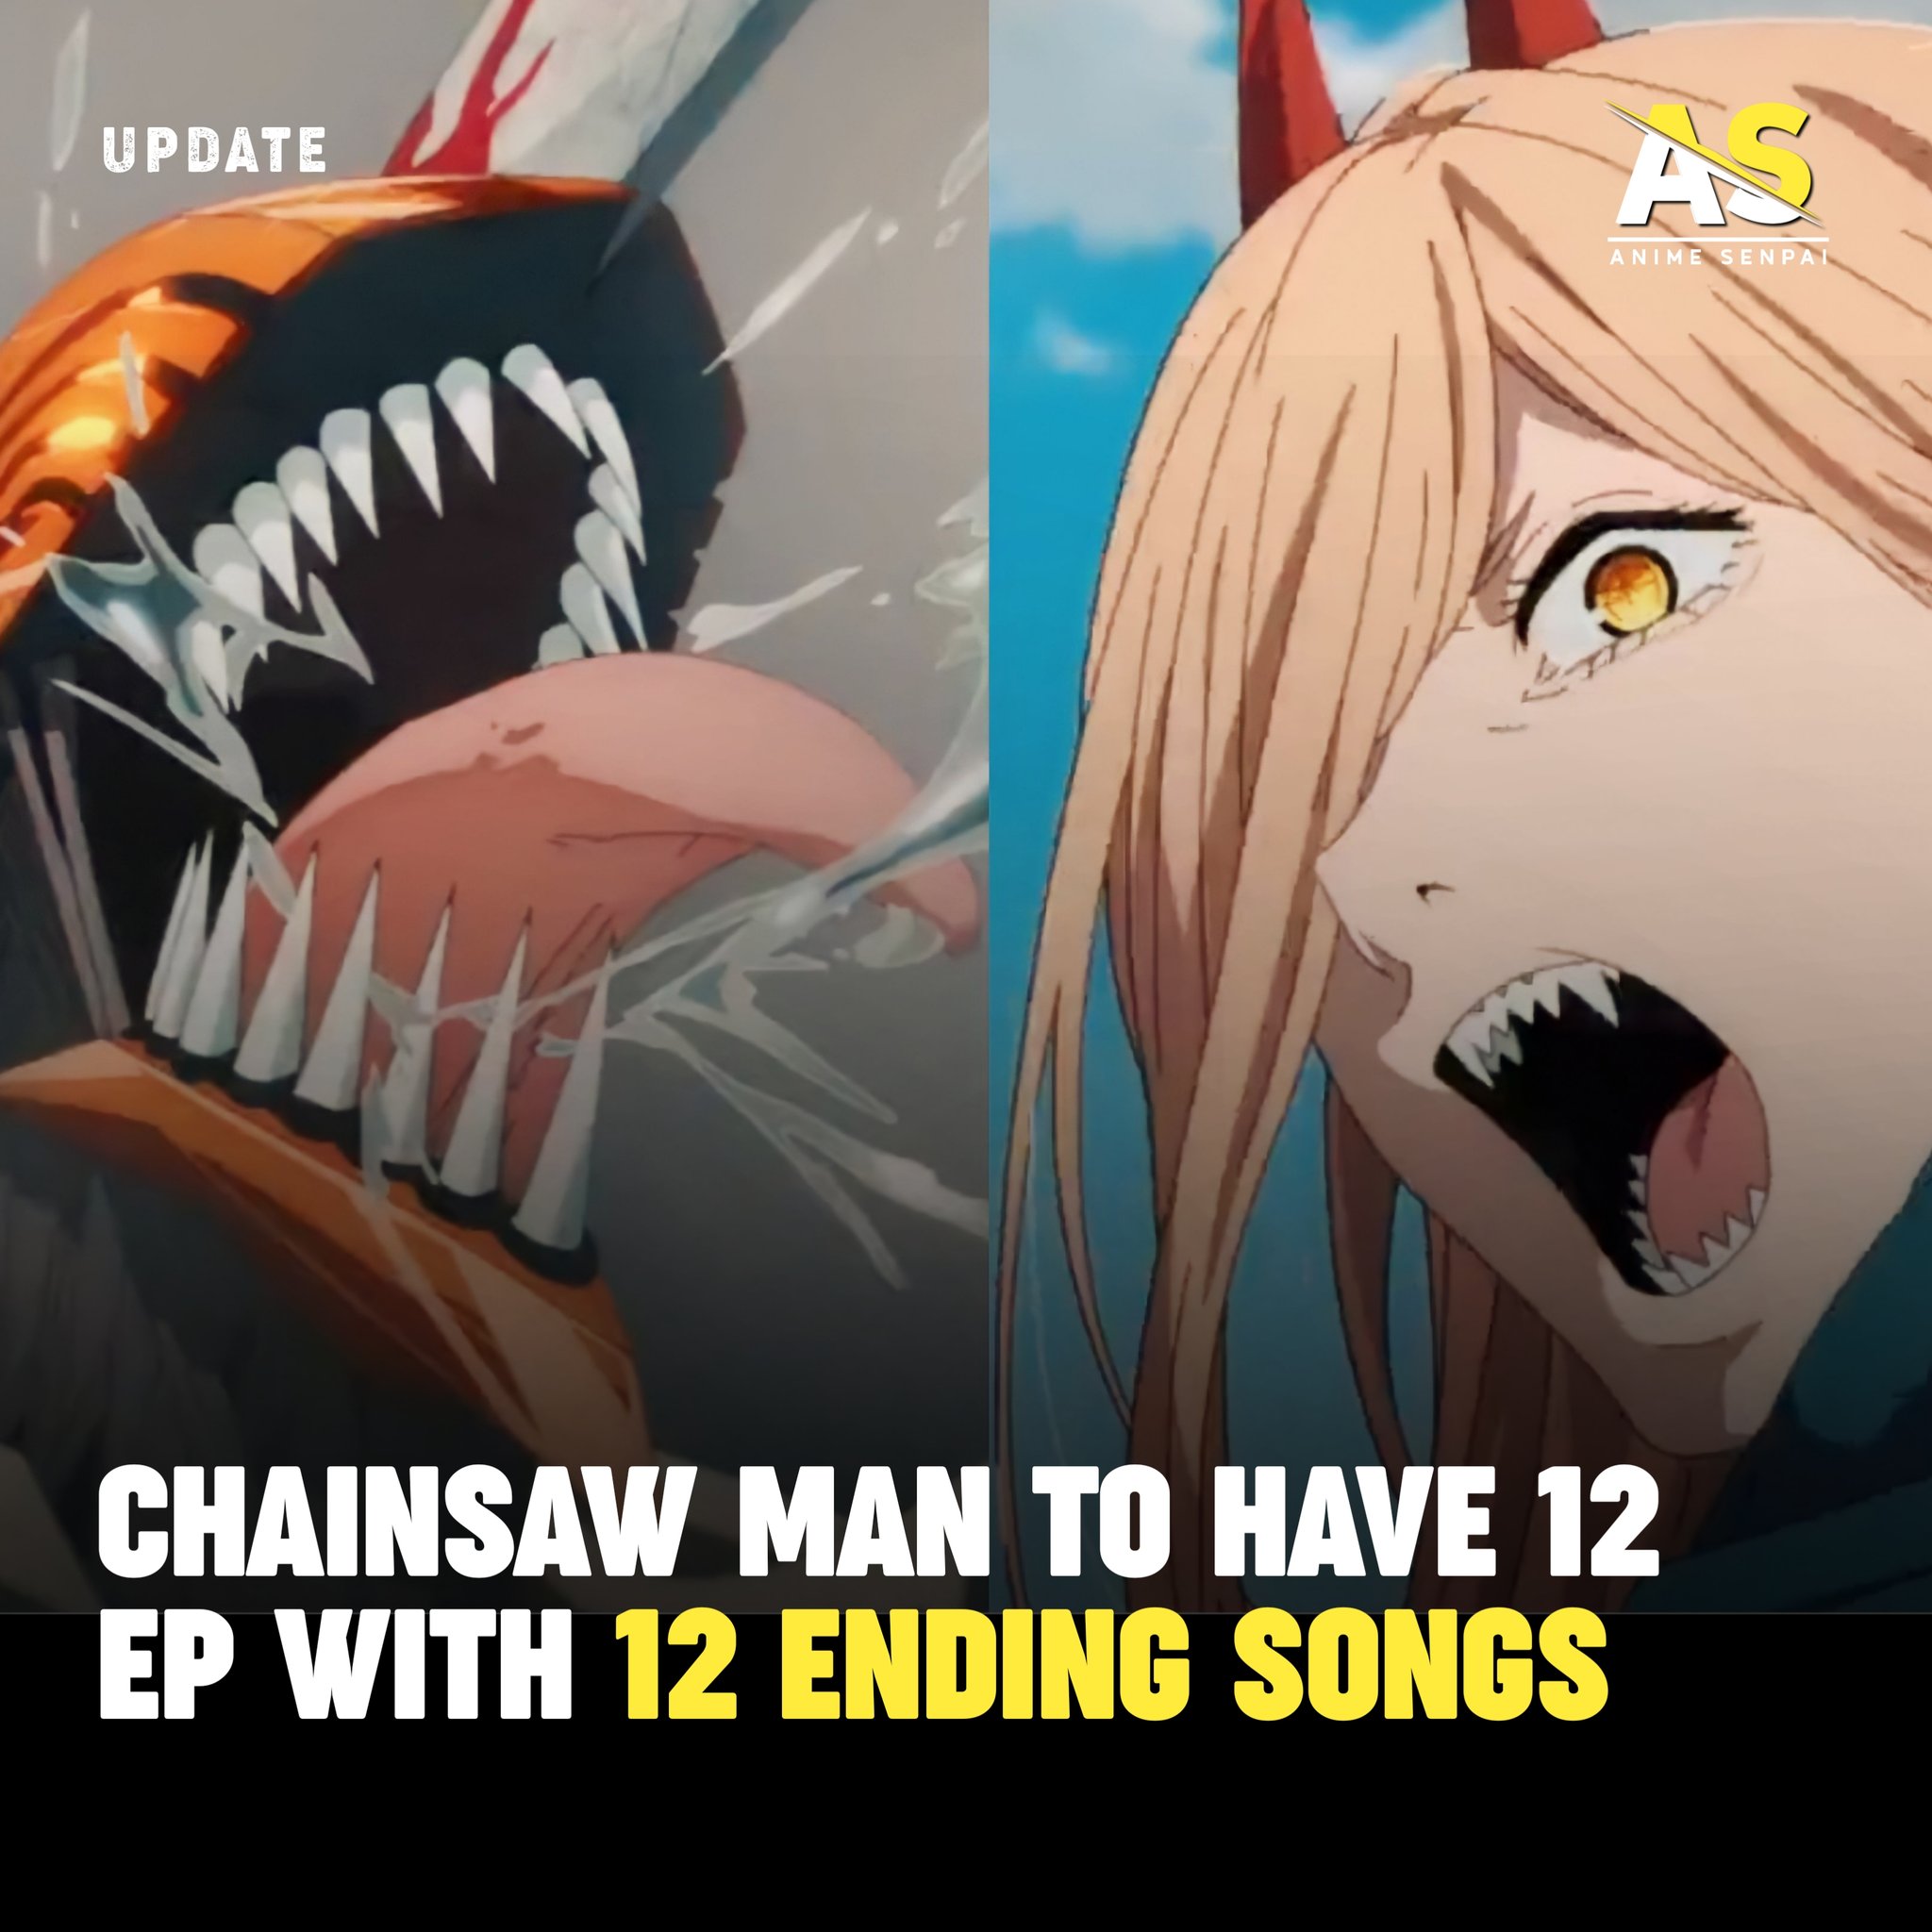 Chainsaw Man Reveals Episode 8 Ending With Song by TK From Ling